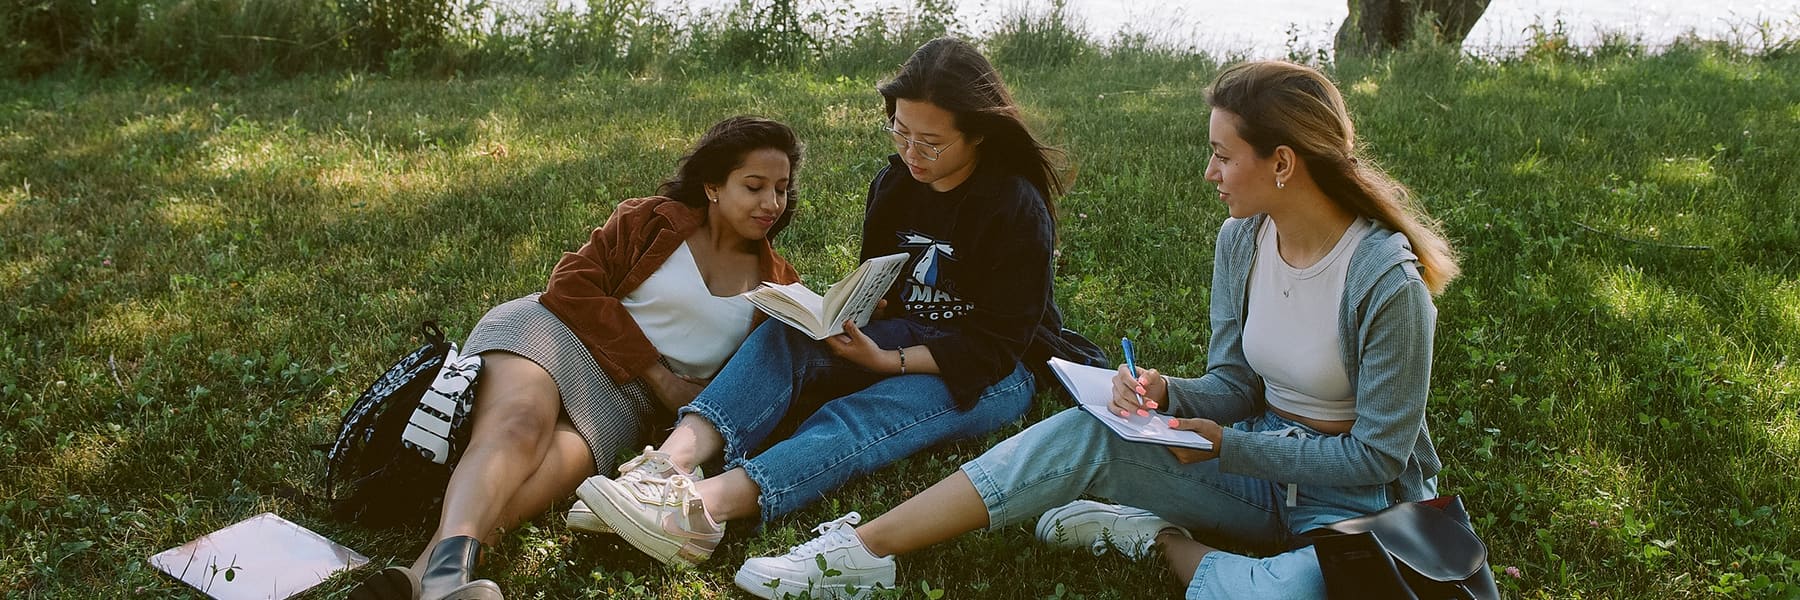 Three students study on campus outside under a tree.